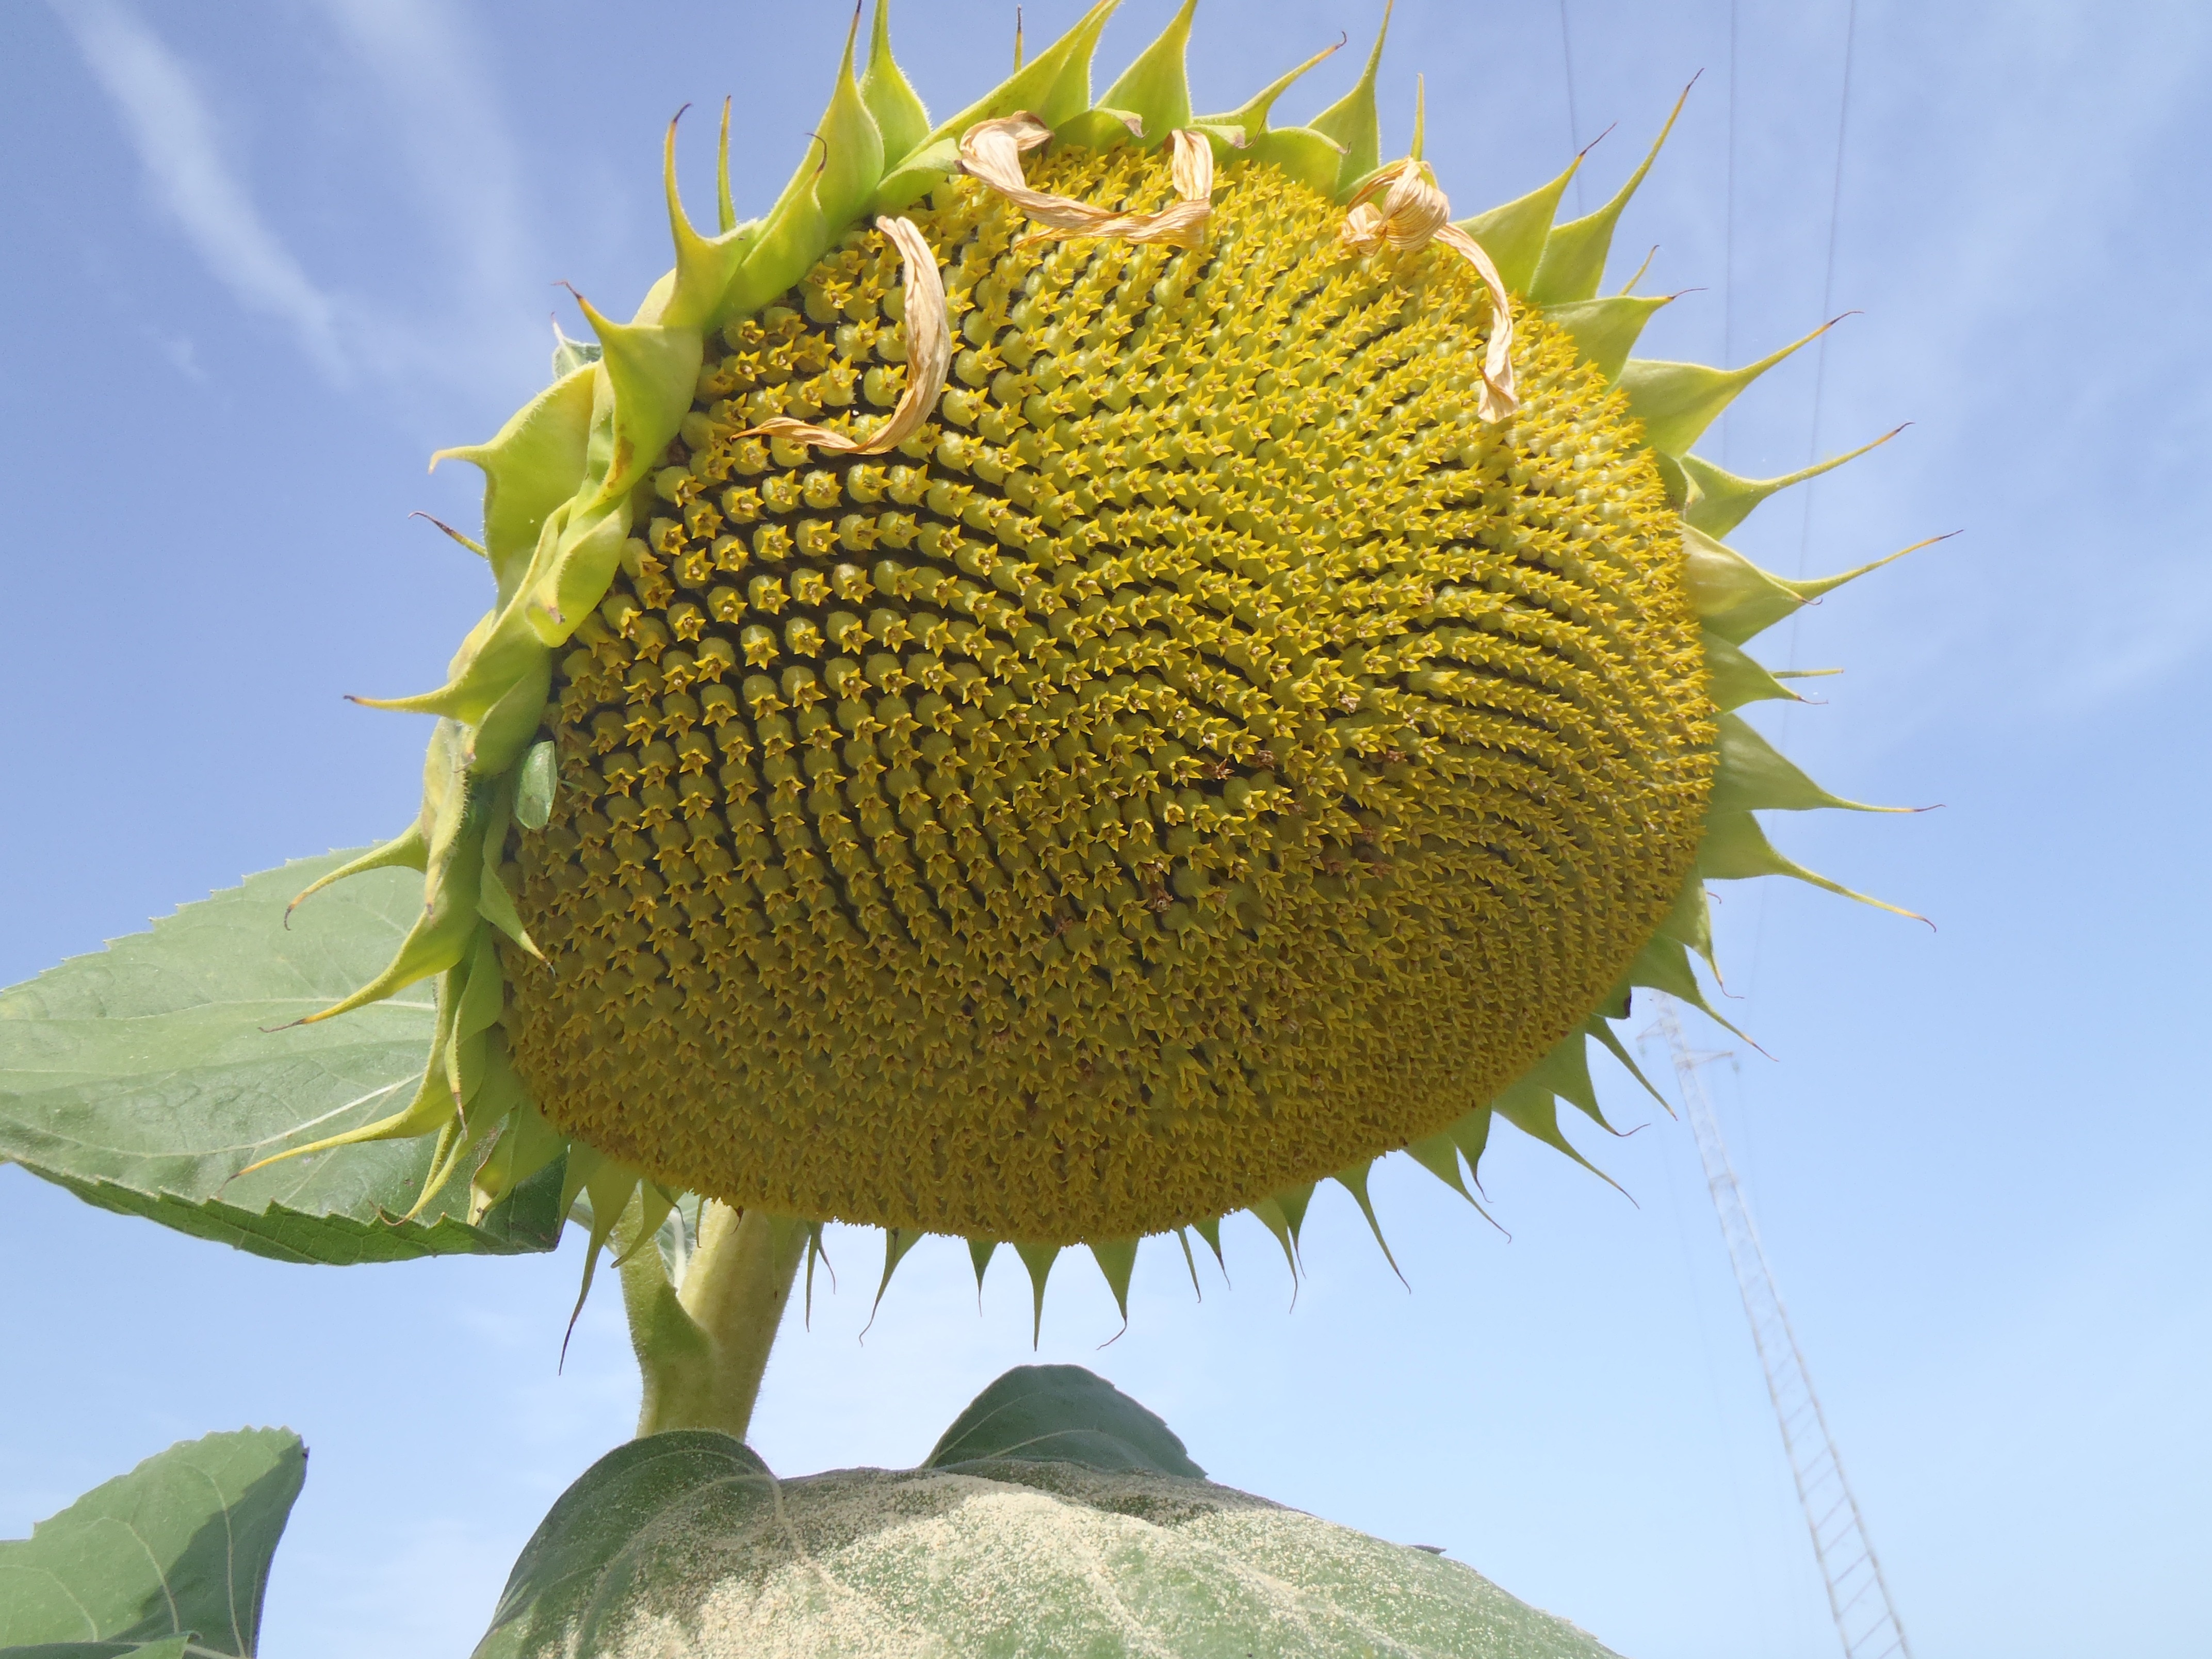 view angle photo of sunflower under blue sky